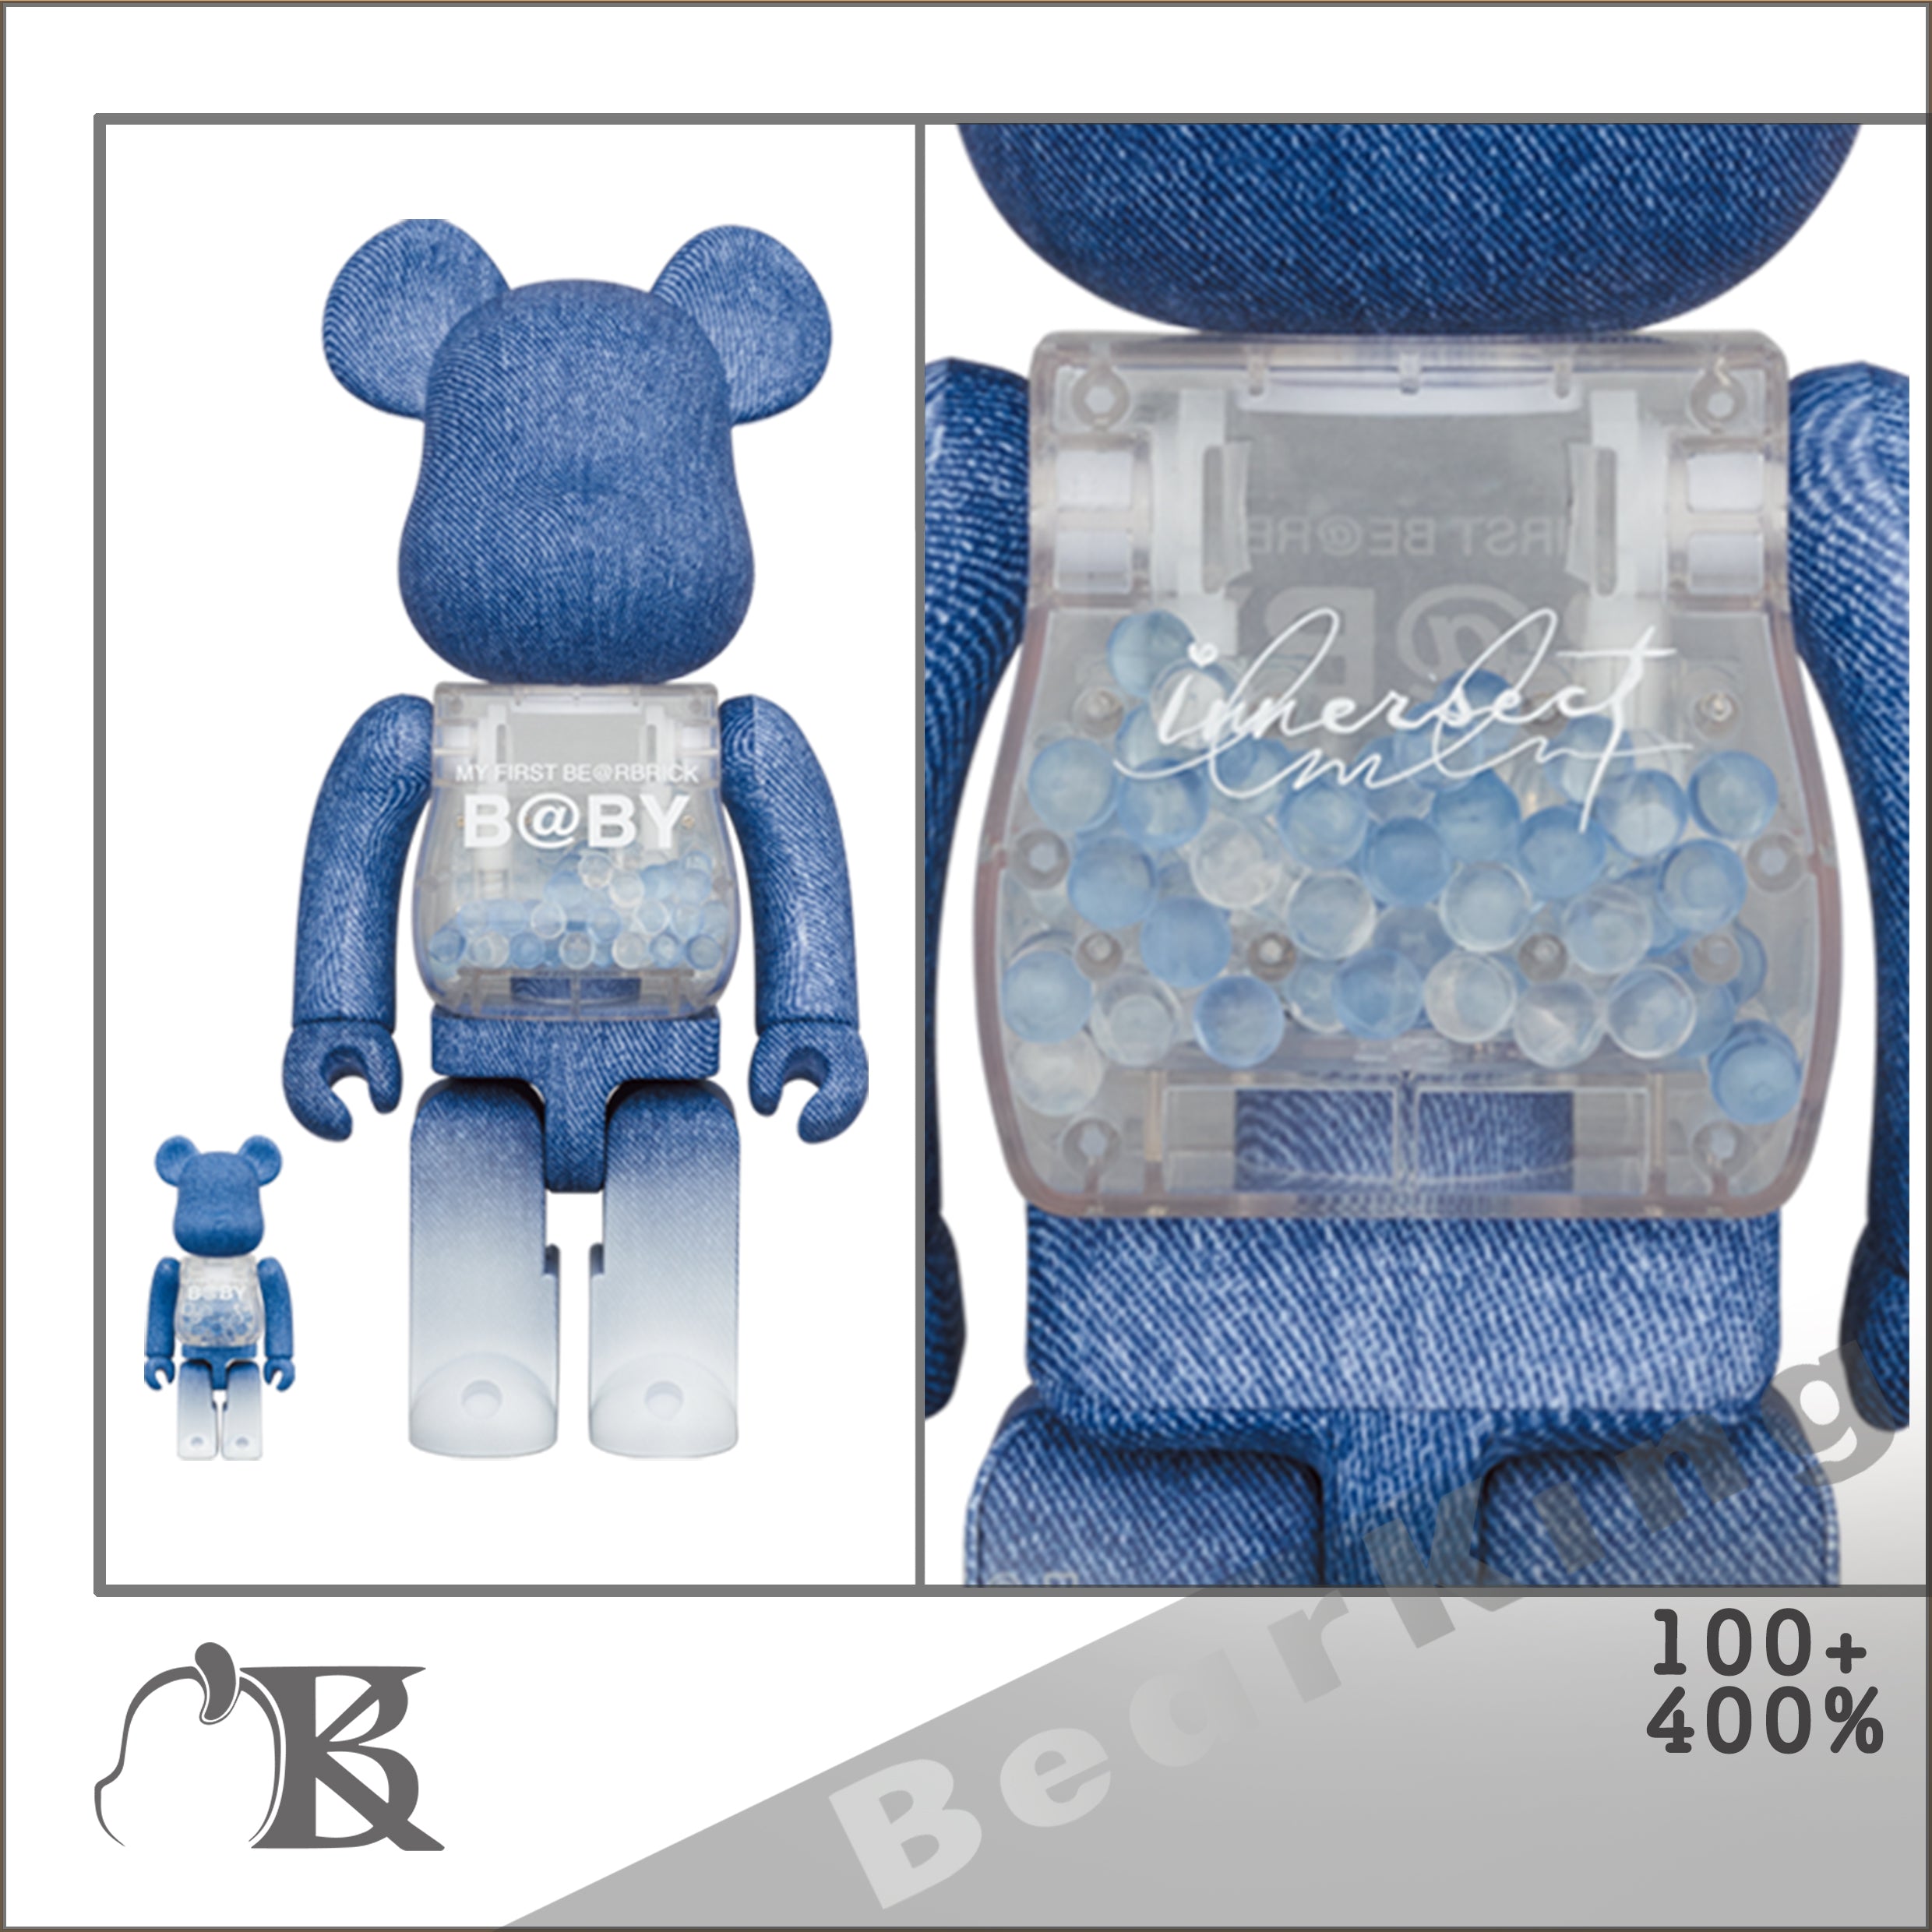 MY FIRST BE@RBRICK B@BY INNERSECT 2021 100％ & 400％ 千秋 Baby 牛仔